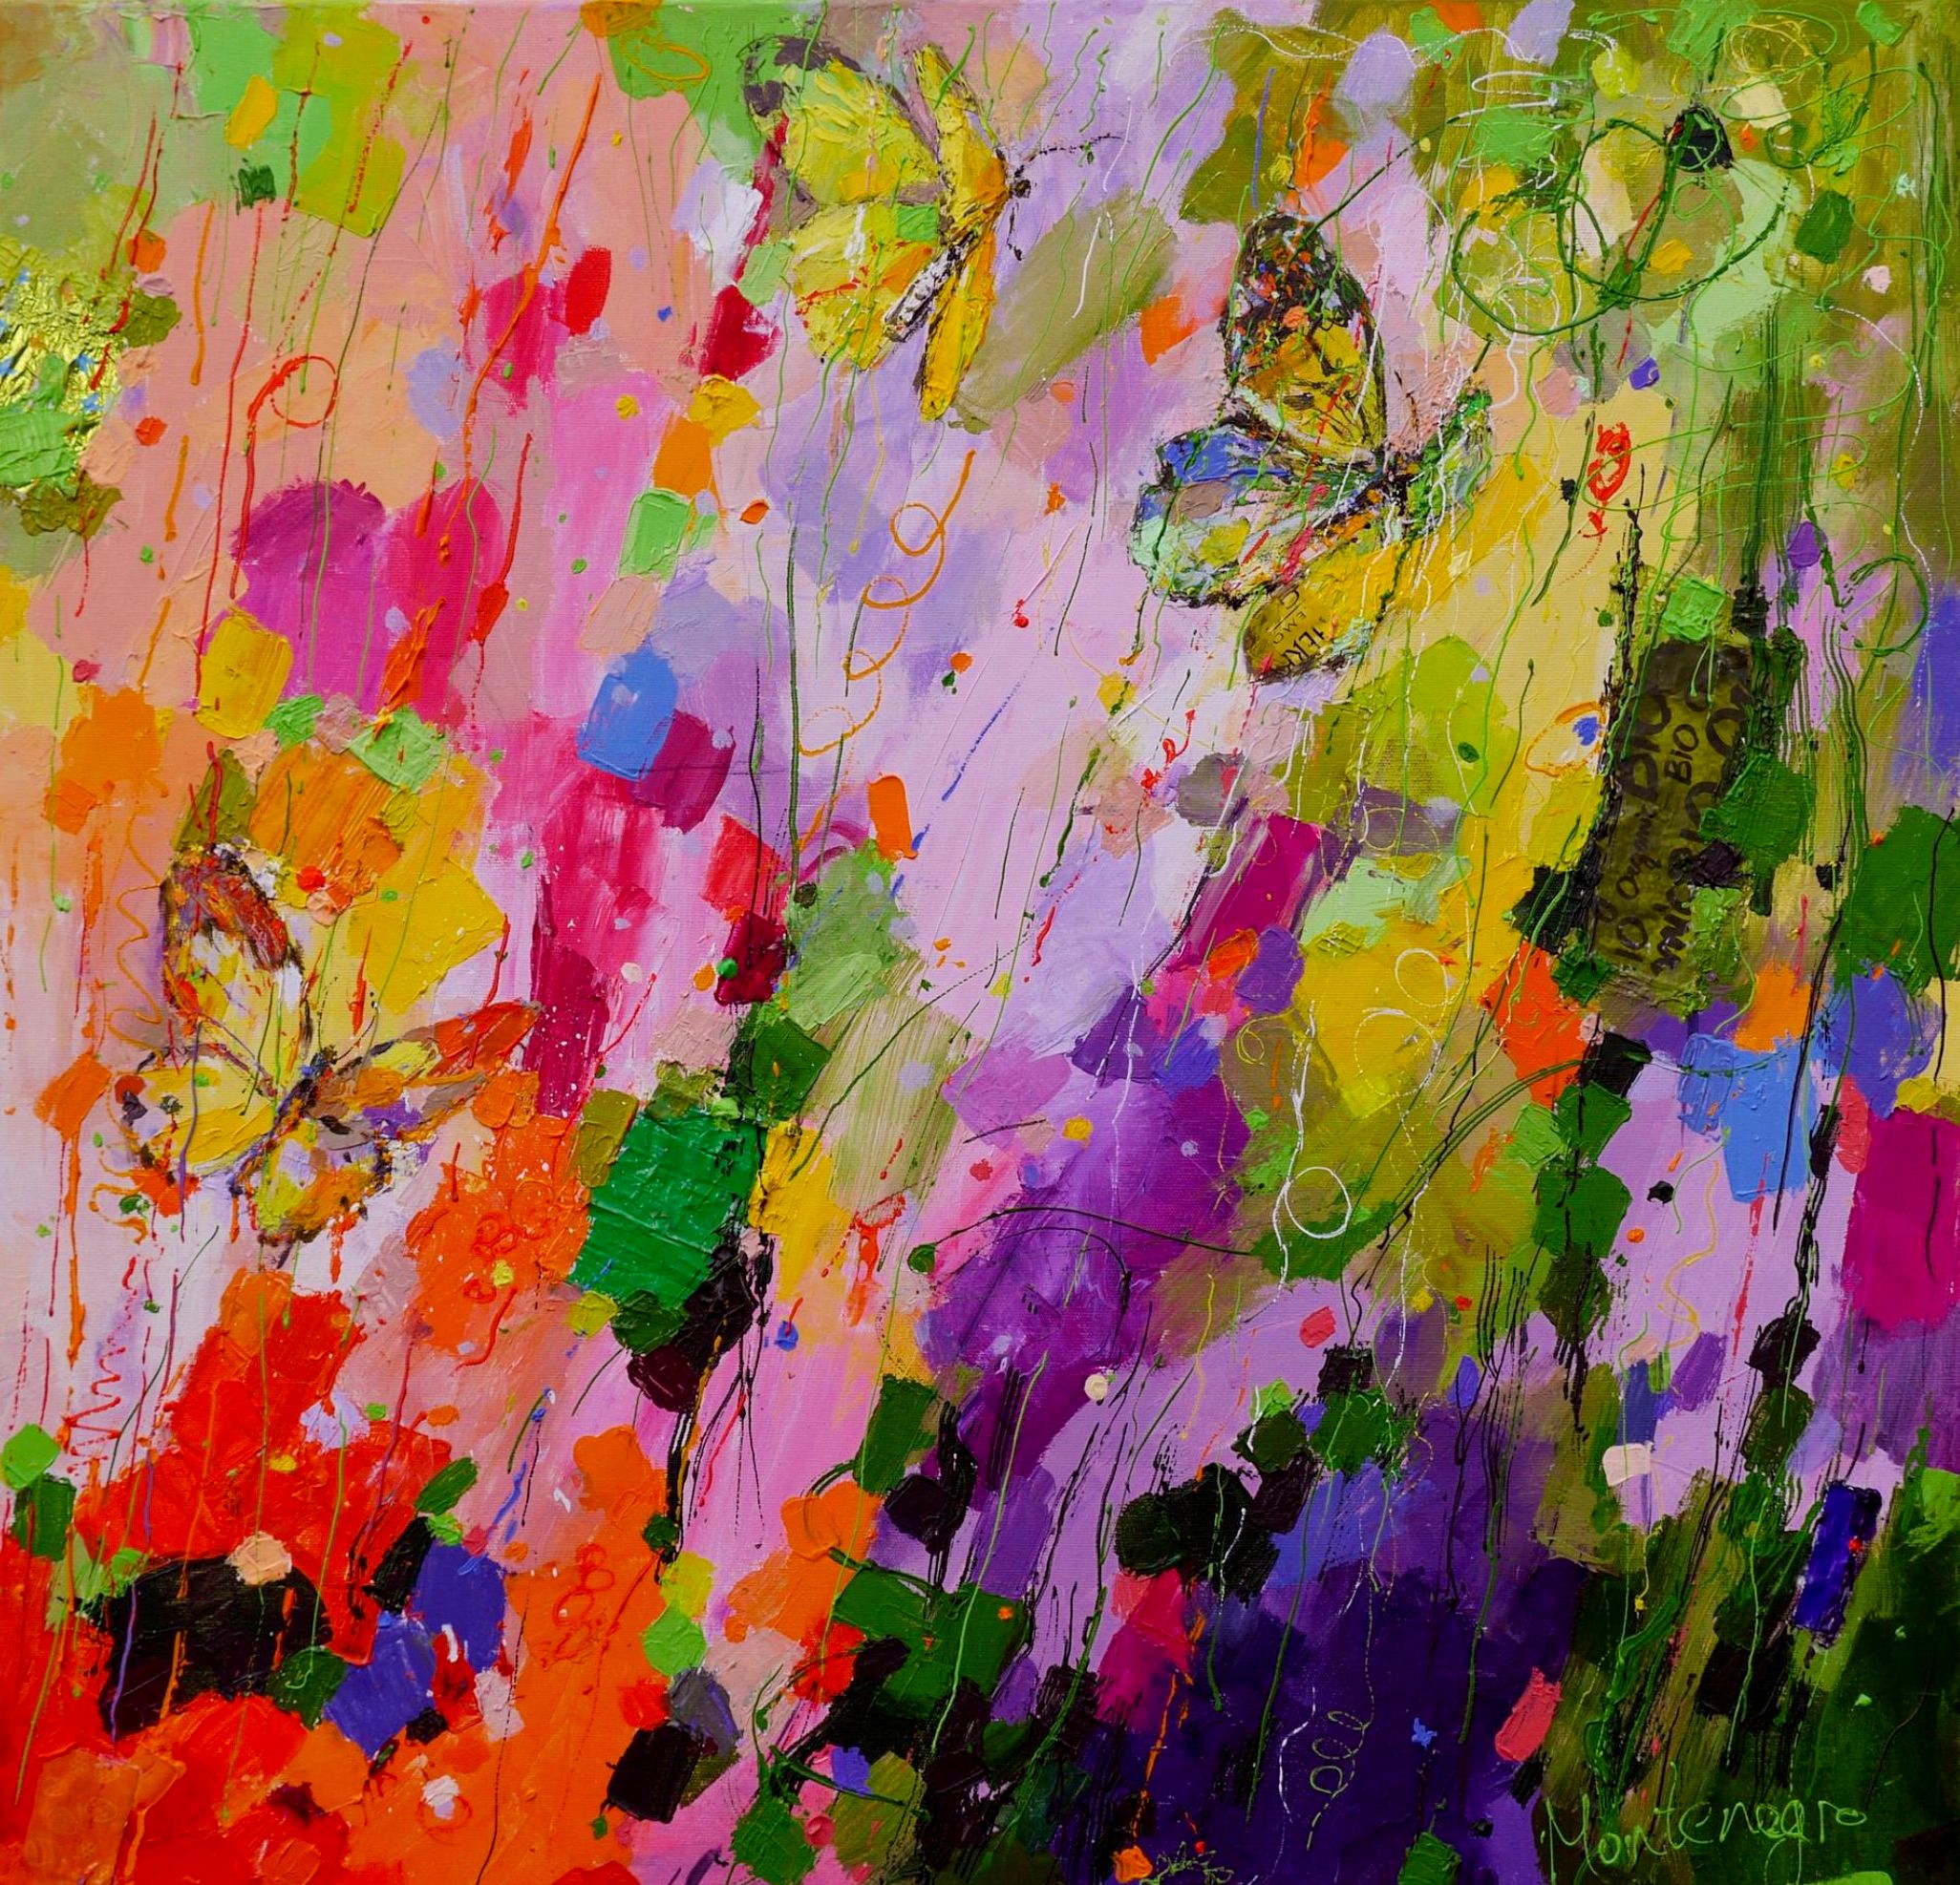 Miriam Montenegro expressionist painting flowers and butterflies